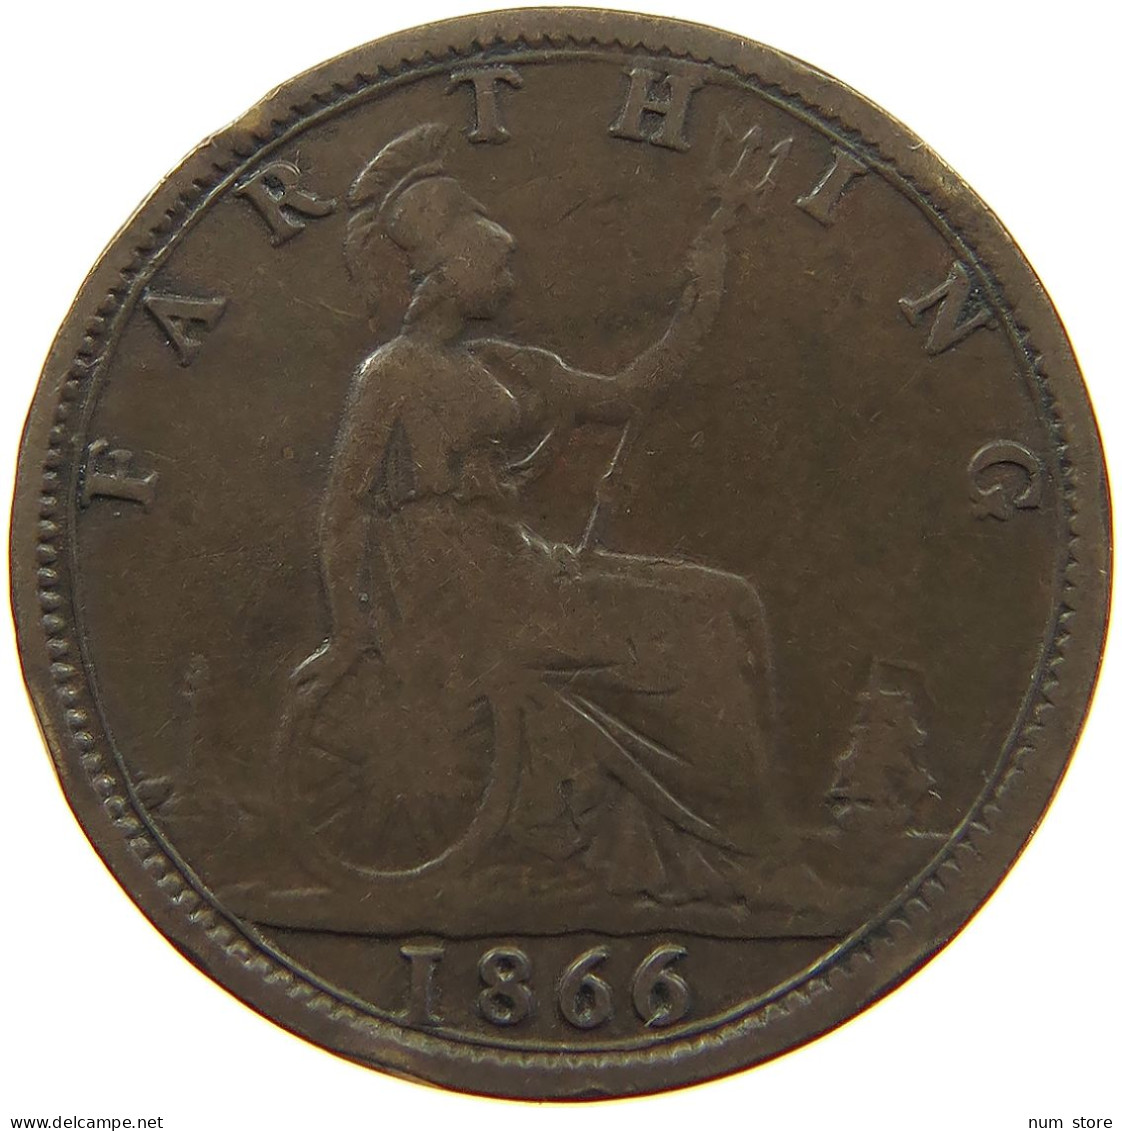 GREAT BRITAIN FARTHING 1866 Victoria 1837-1901 #a011 0817 - B. 1 Farthing